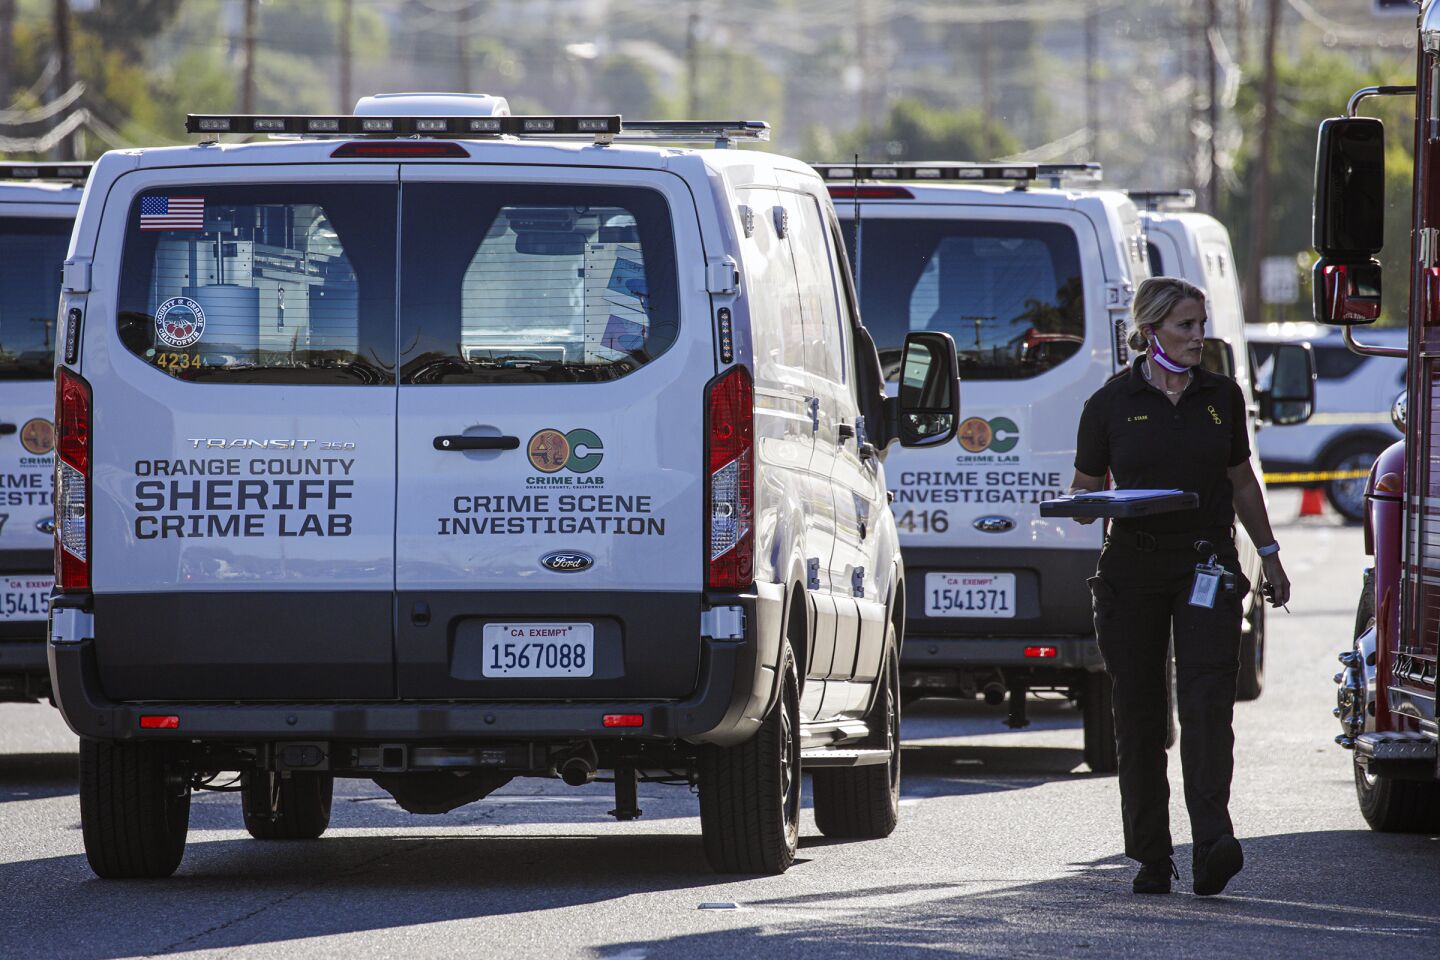 Sheriff's vans at the shooting site